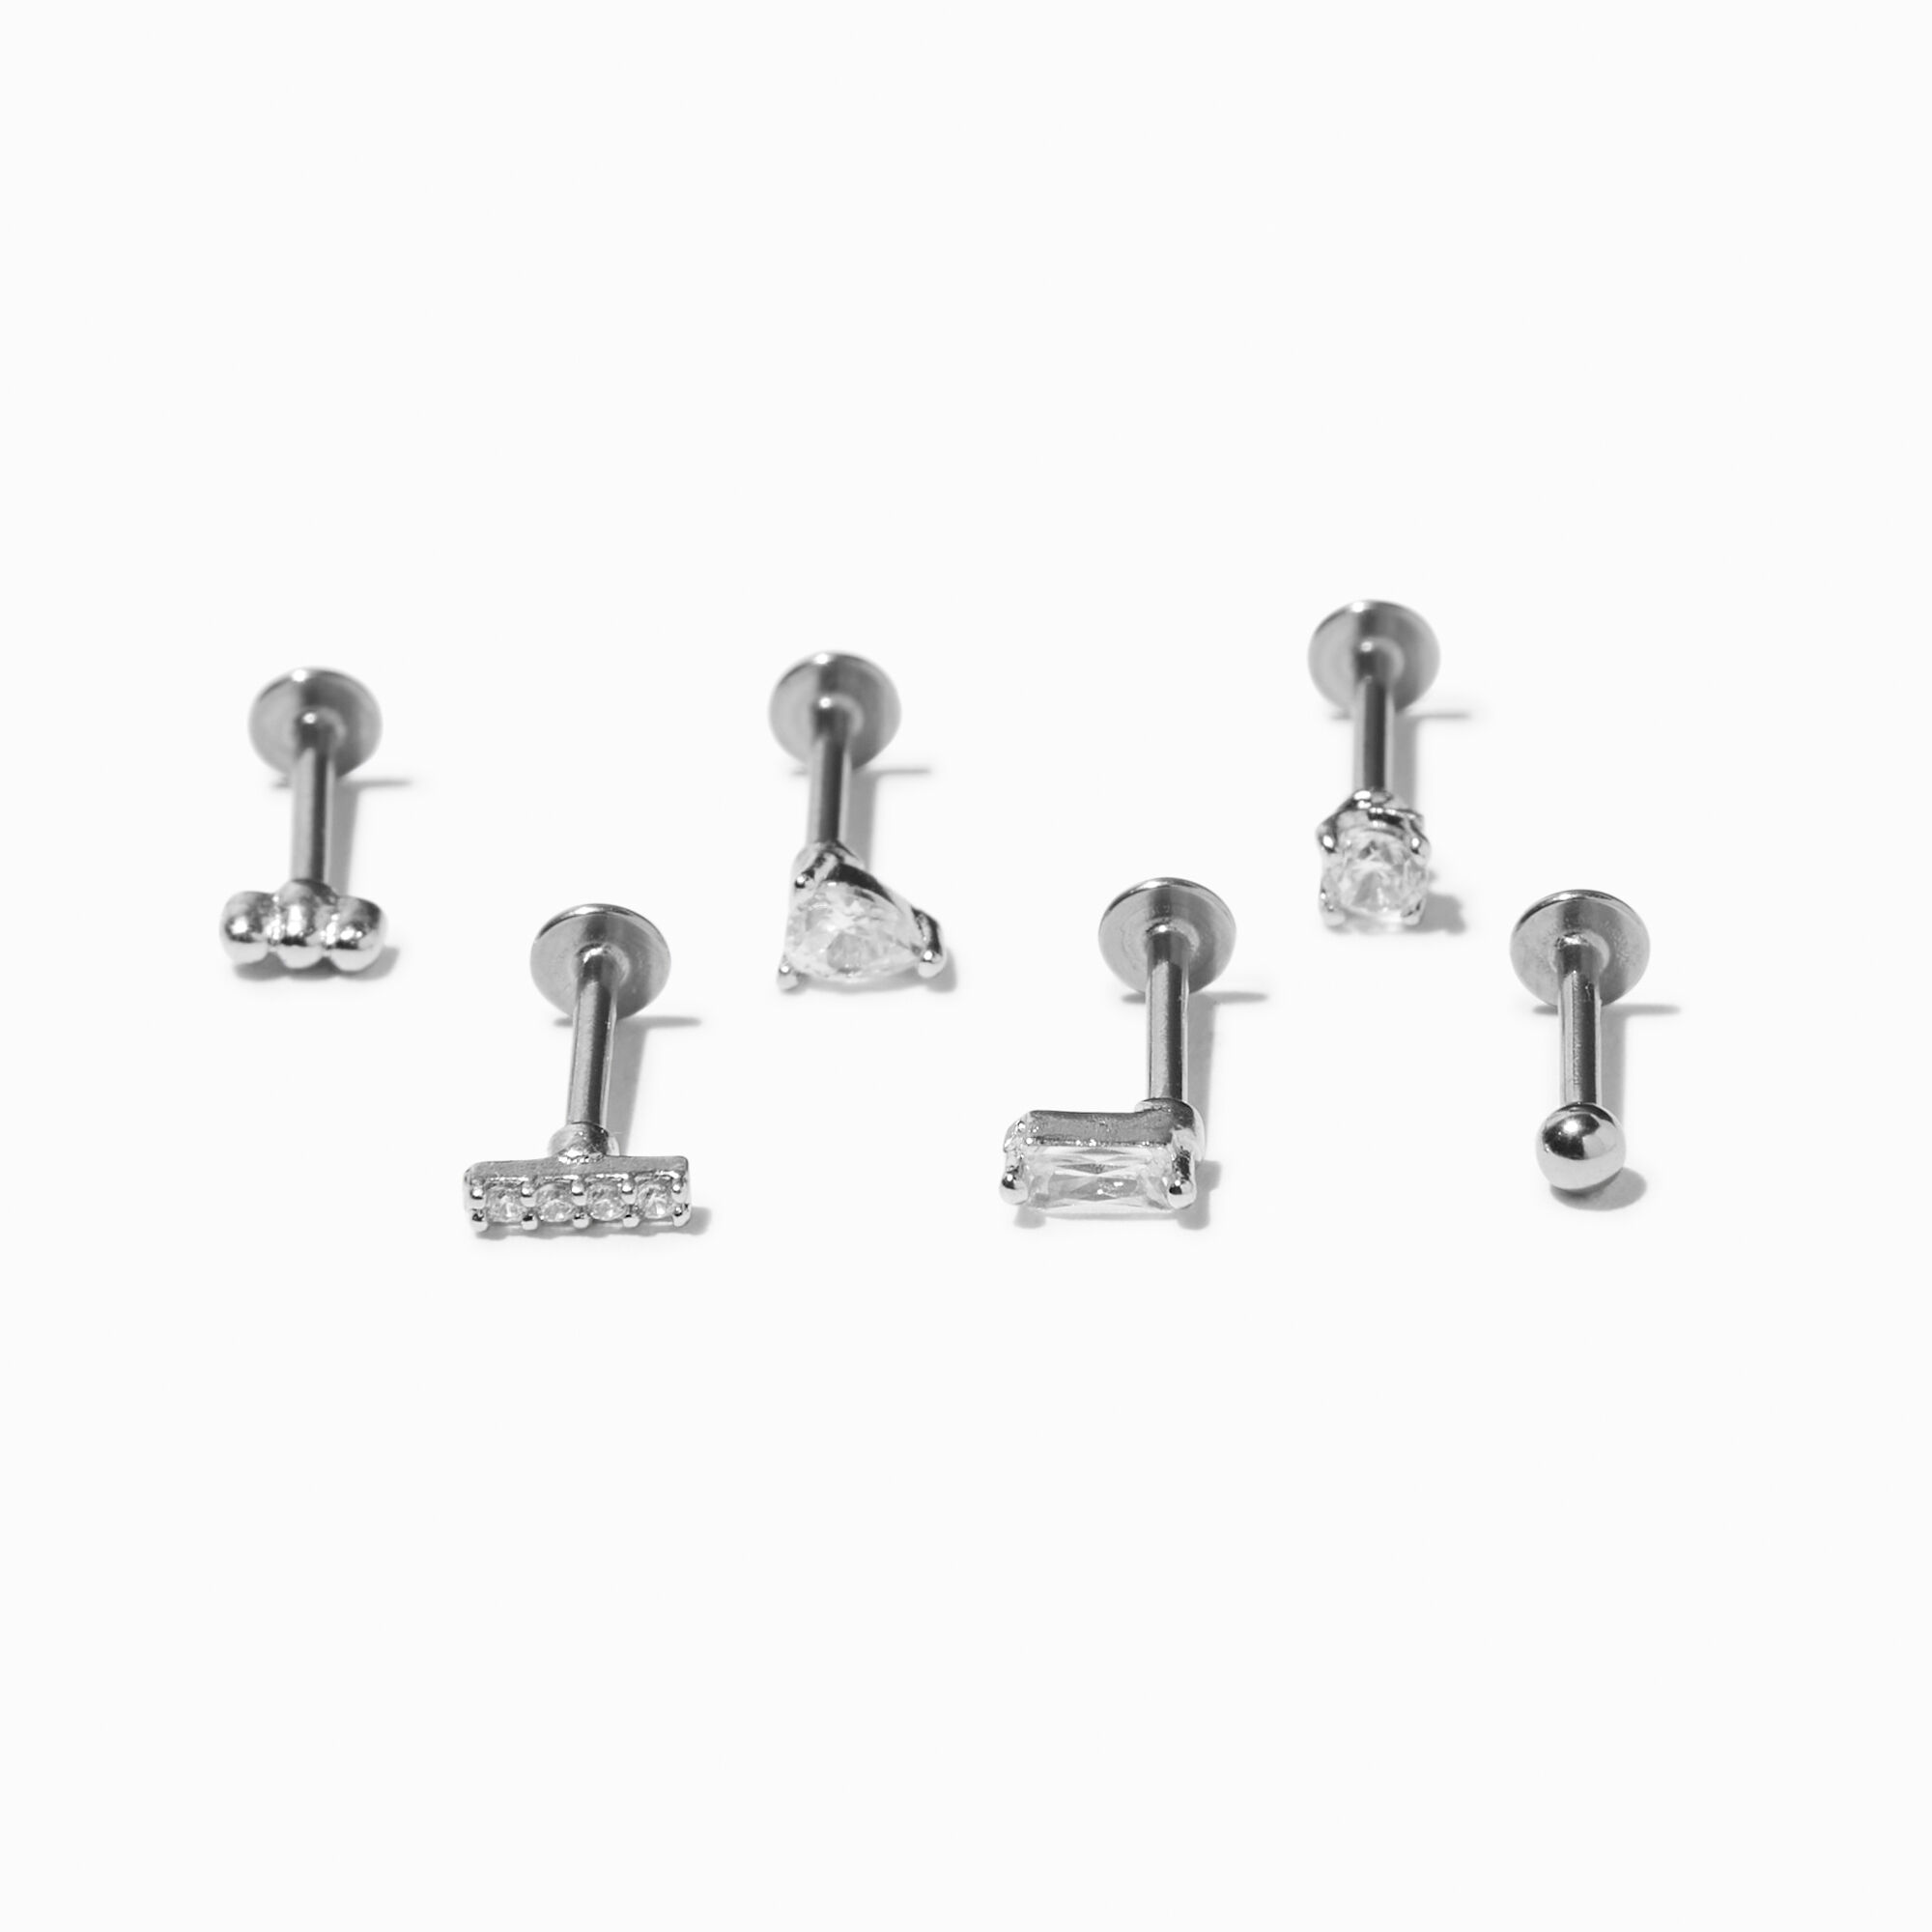 View Claires Geometric 16G Cartilage Earrings 3 Pack Silver information